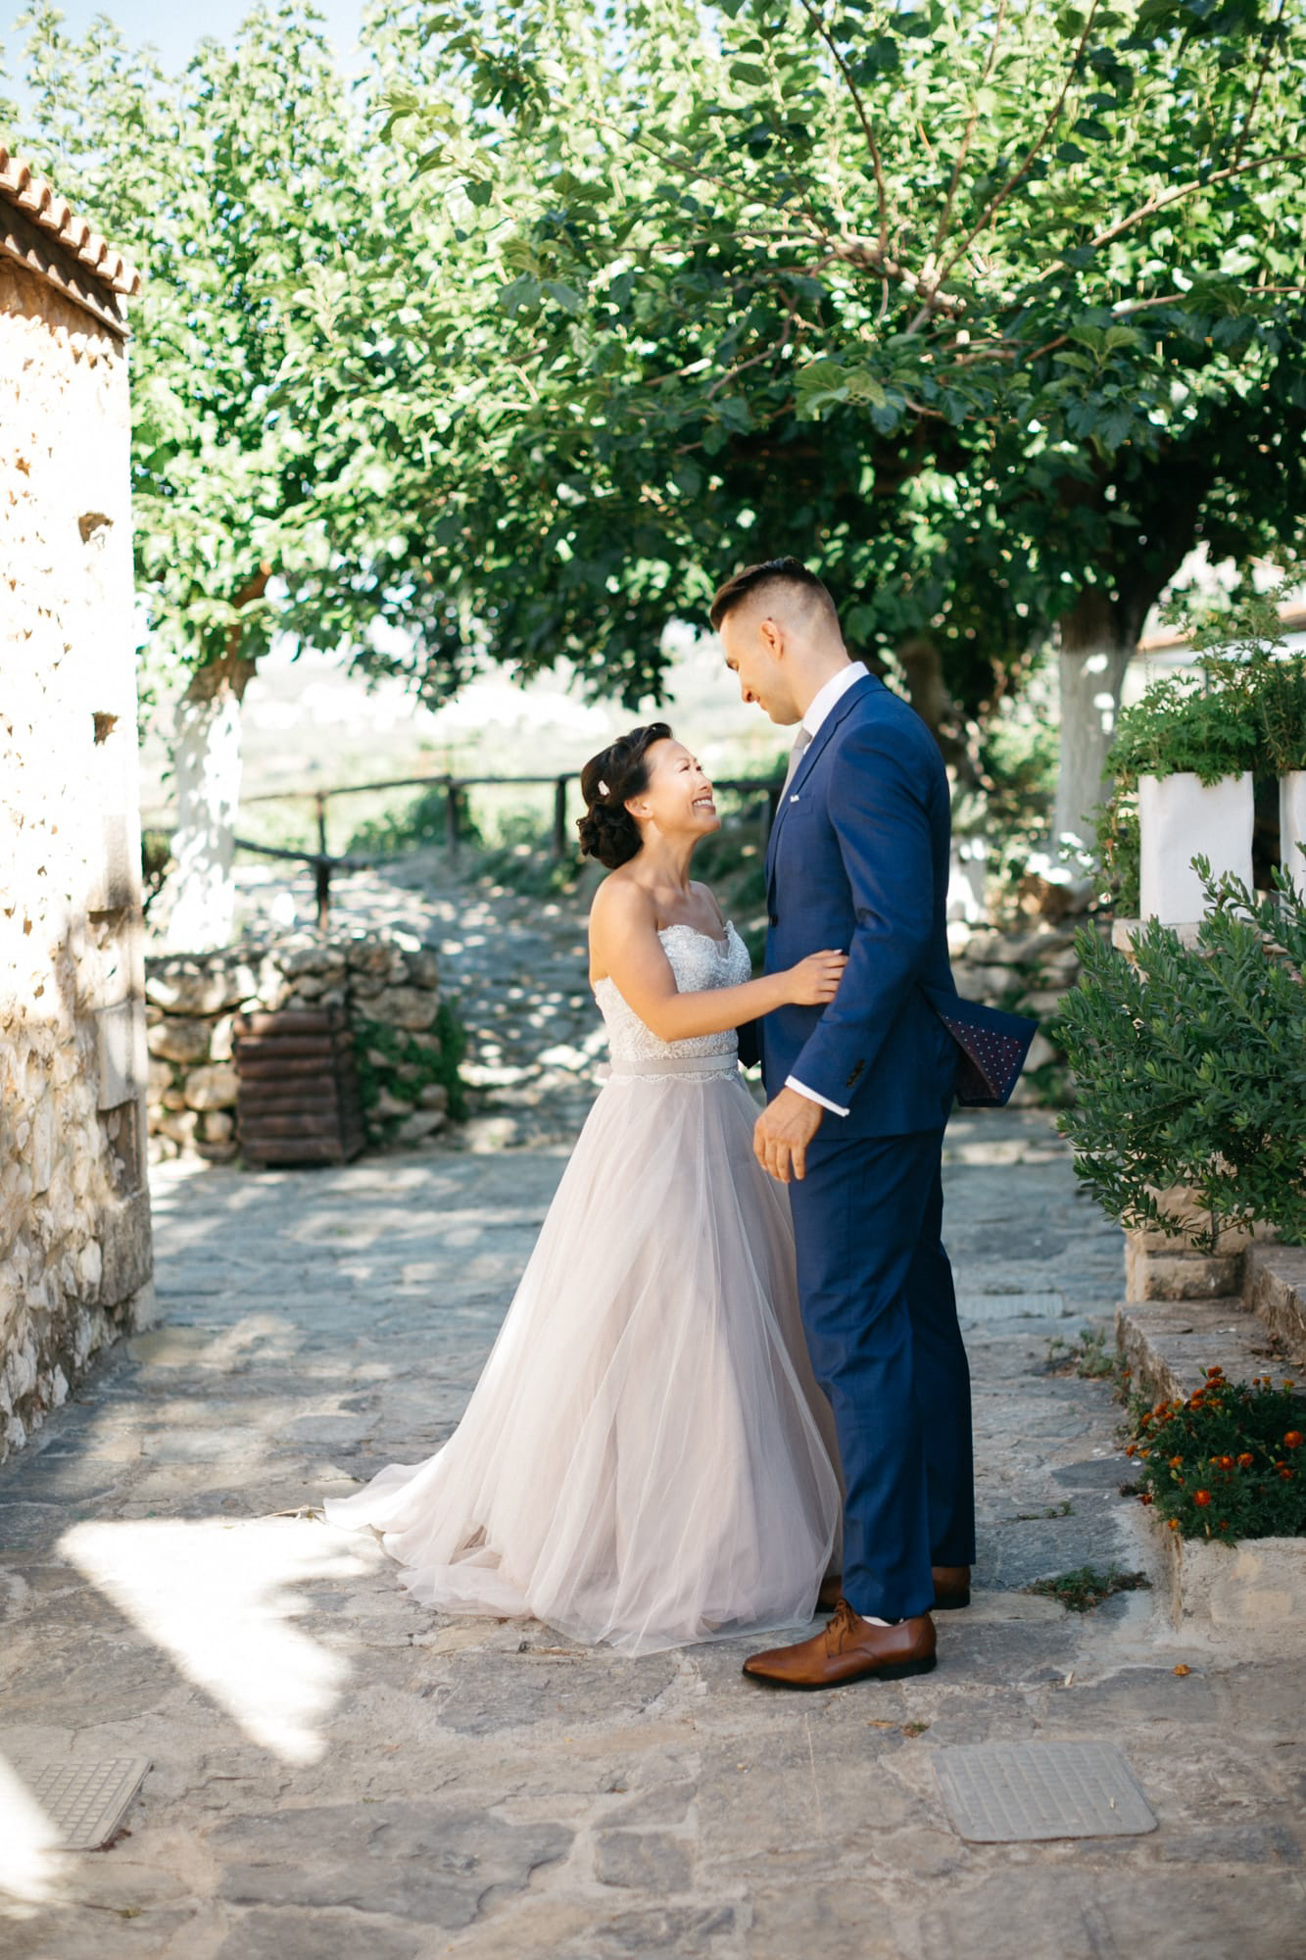 First look of the bride and groom in Agreco Farms, Grecotel, Crete, Greece.